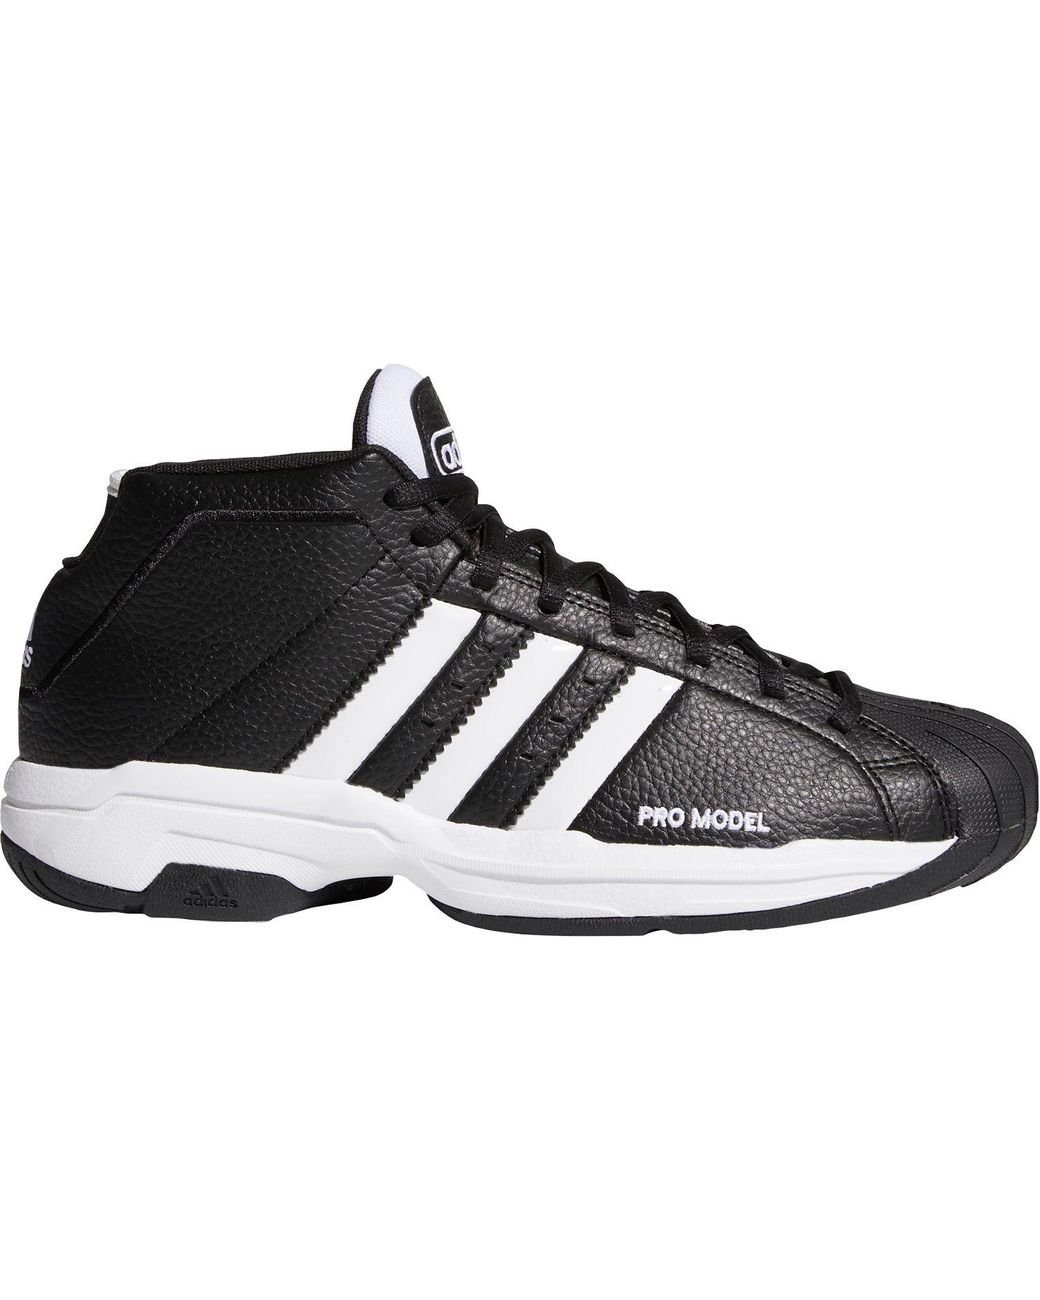 adidas Leather Pro Model 2g Basketball Shoes in Black/White/Black ...